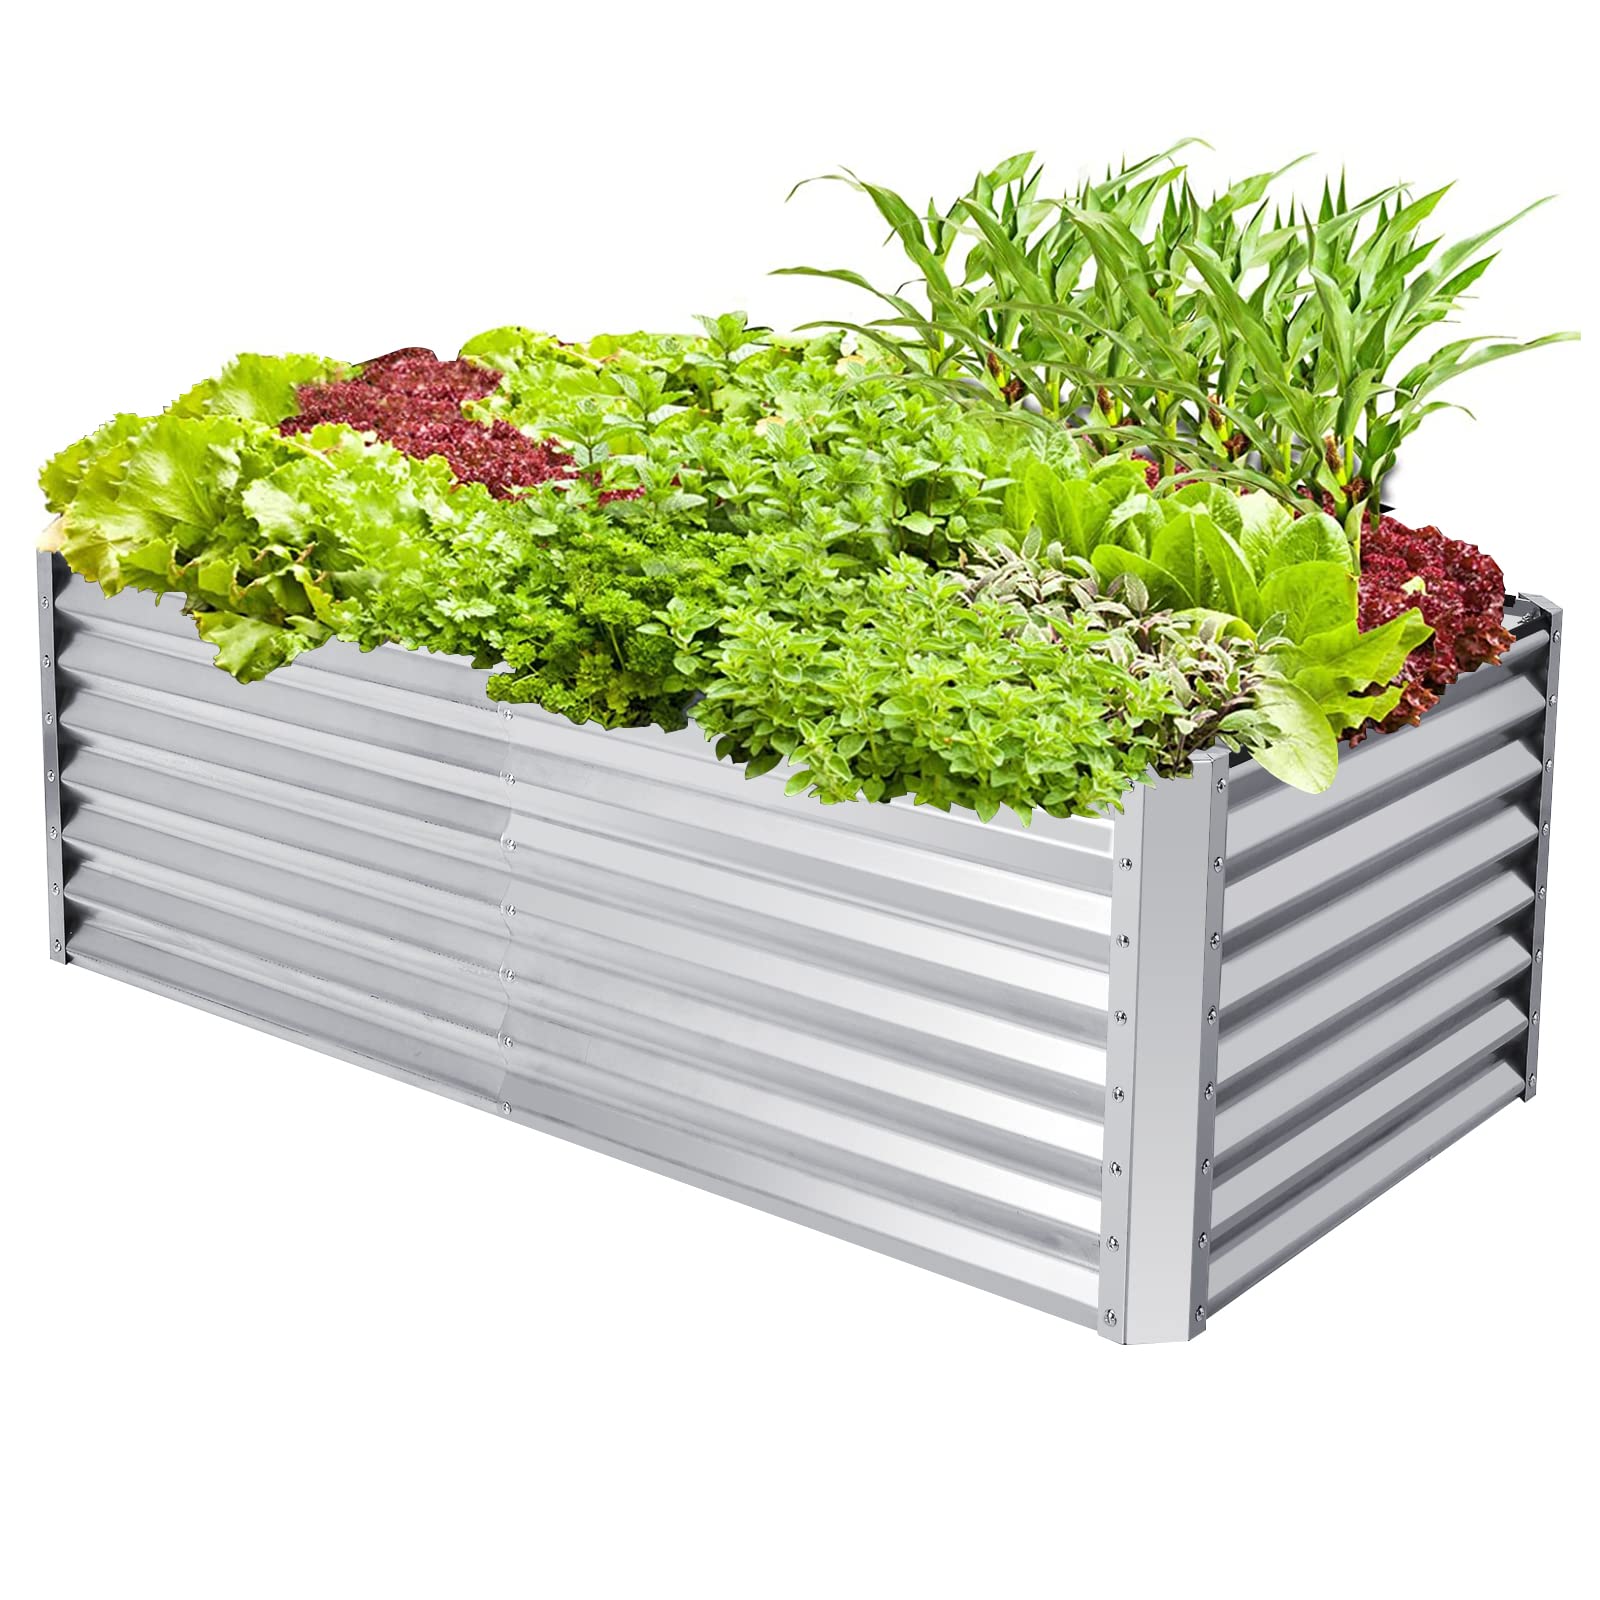 Giantex 6x3x2ft Steel Planter Raised Bed, Protective Edges, 4 Ground Stakes, Vegetables, Flowers Fruit Herb